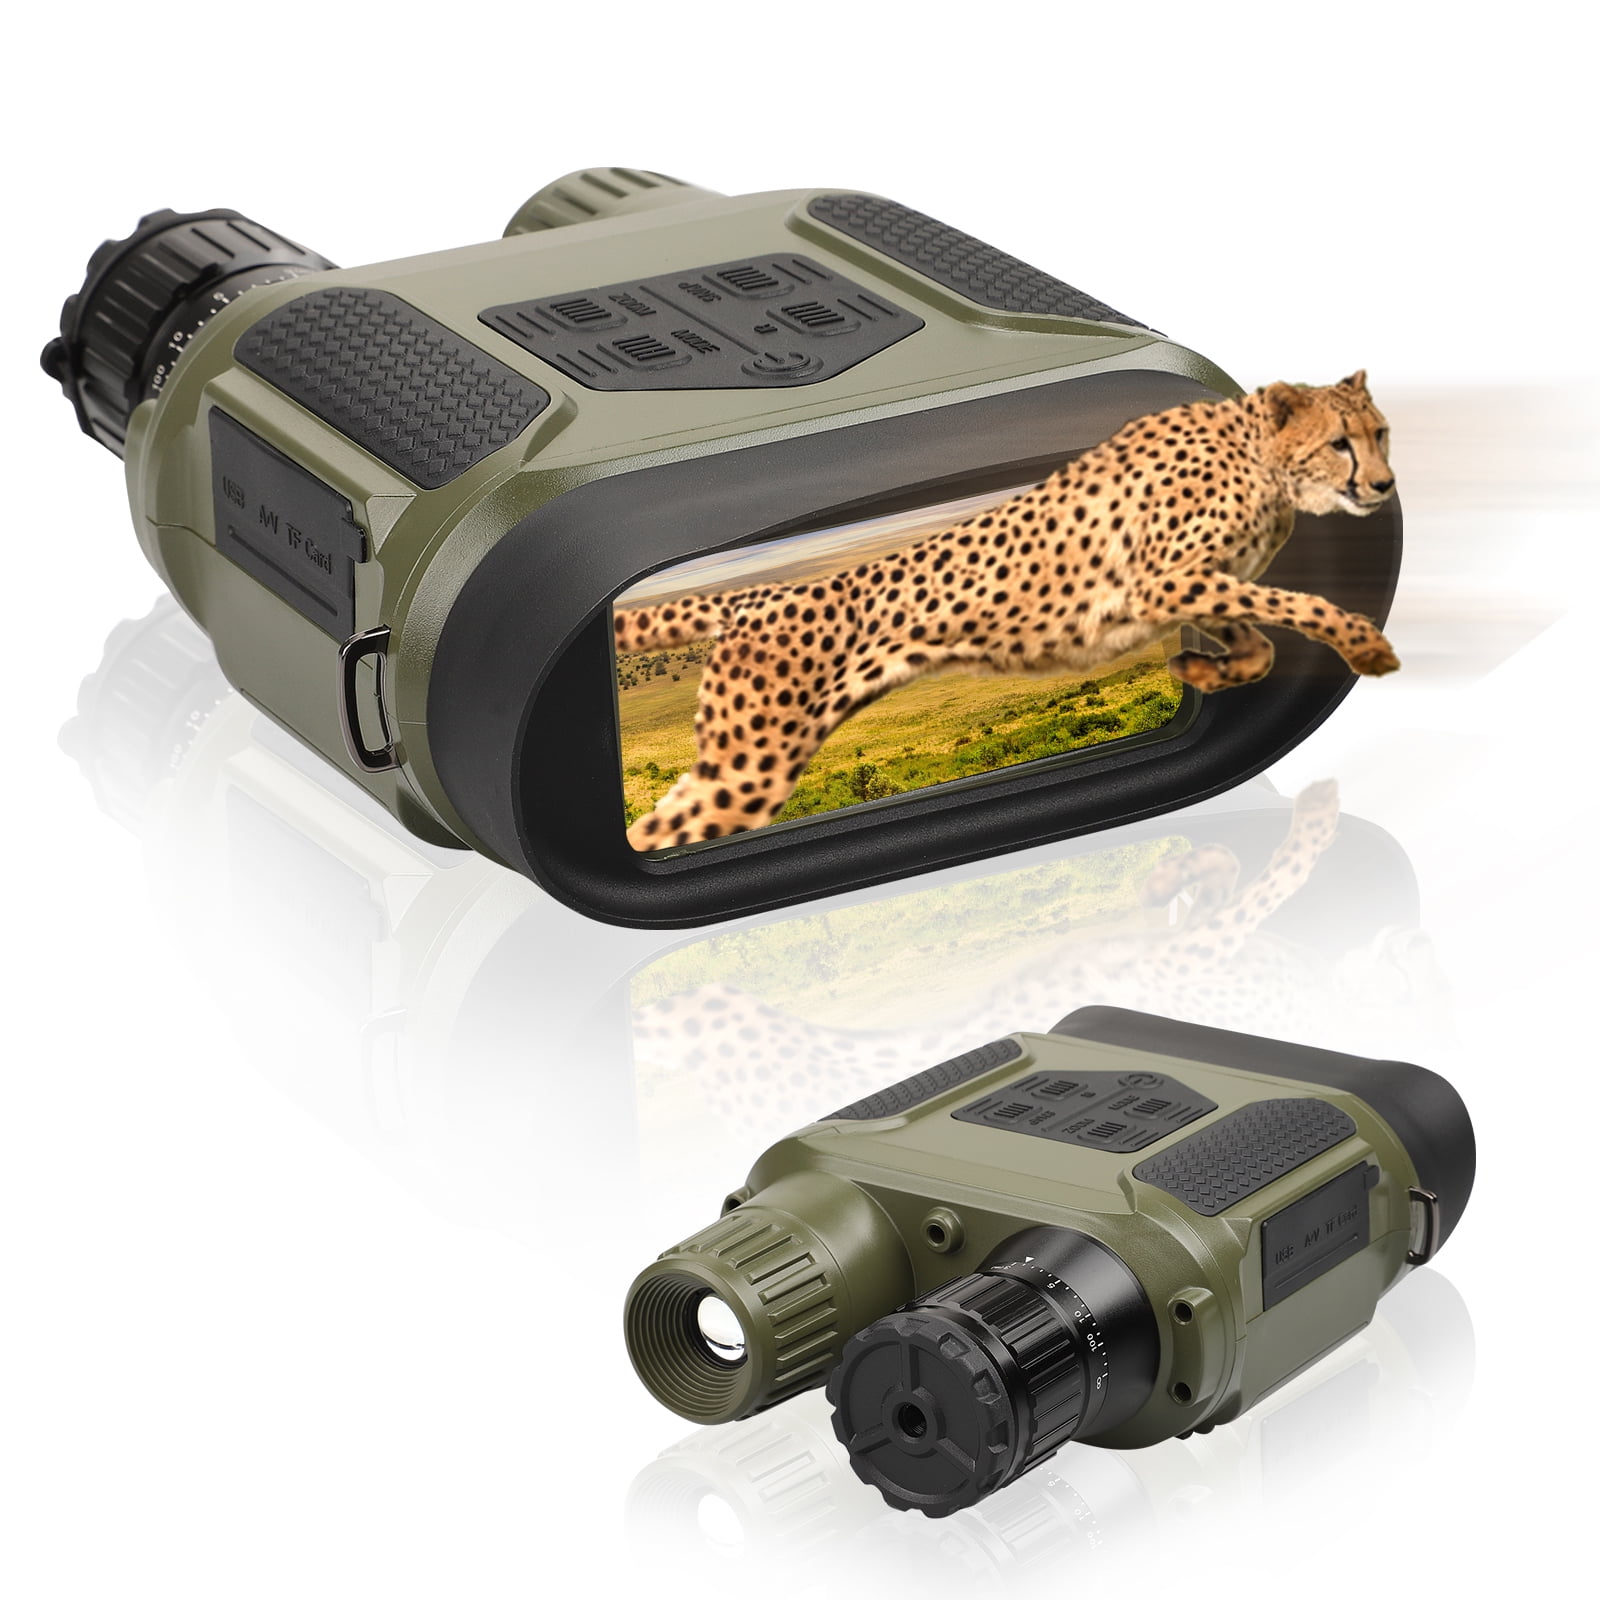 Digital Night Vision Binoculars for 100% Darkness Infrared Night Vision Goggles with LCD Screen,Great for Night Observation 